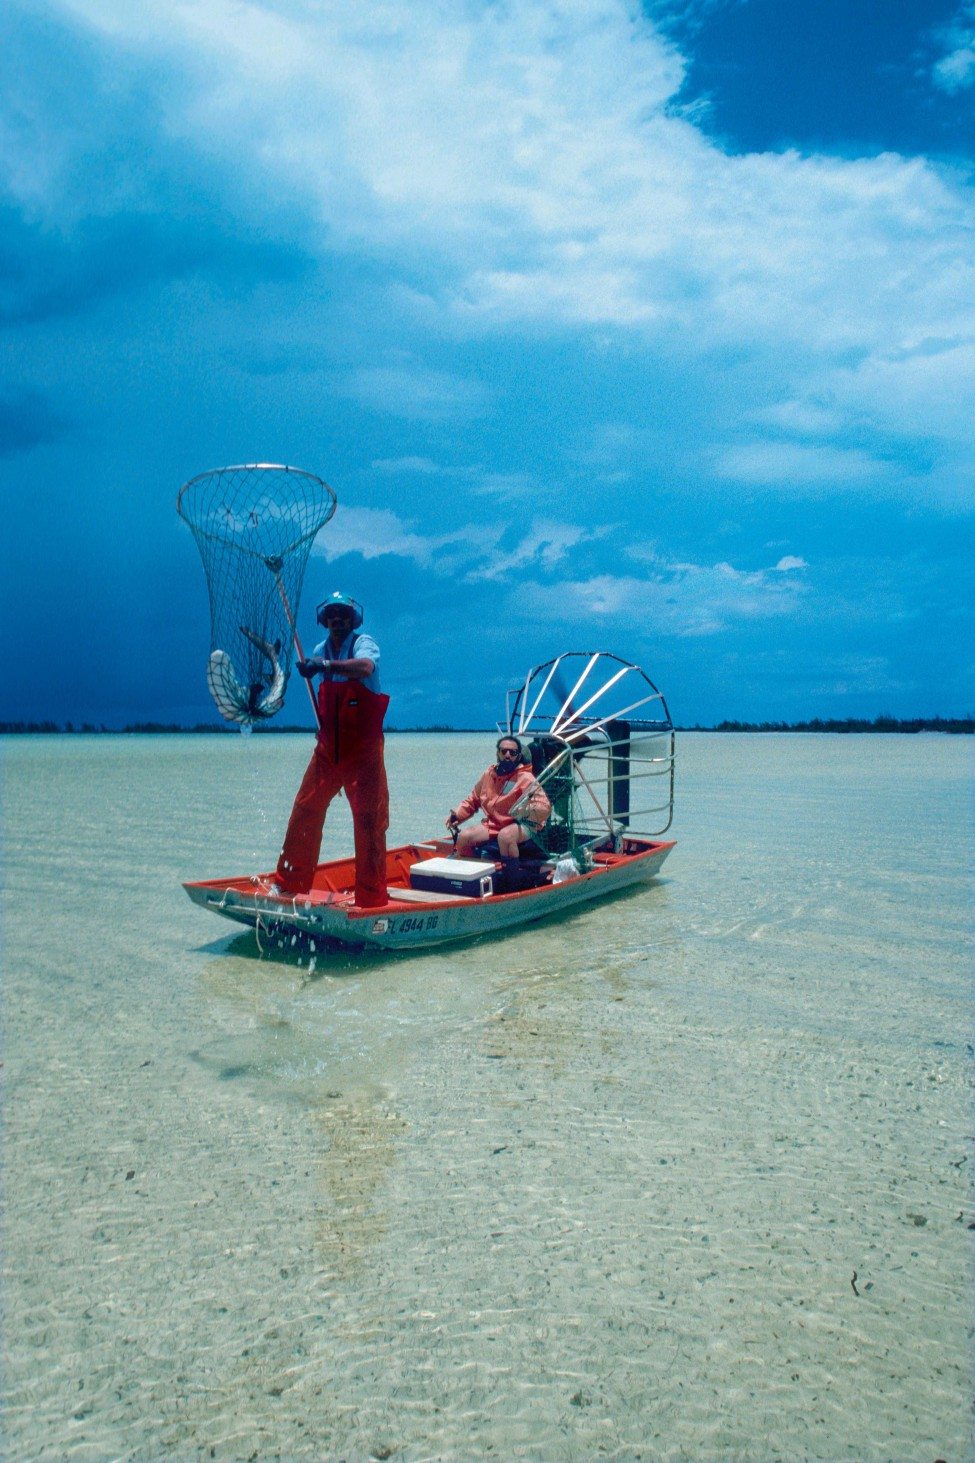 Catching juvenile lemon sharks with a net from an airboat<br />
Photo by Doug Perrine